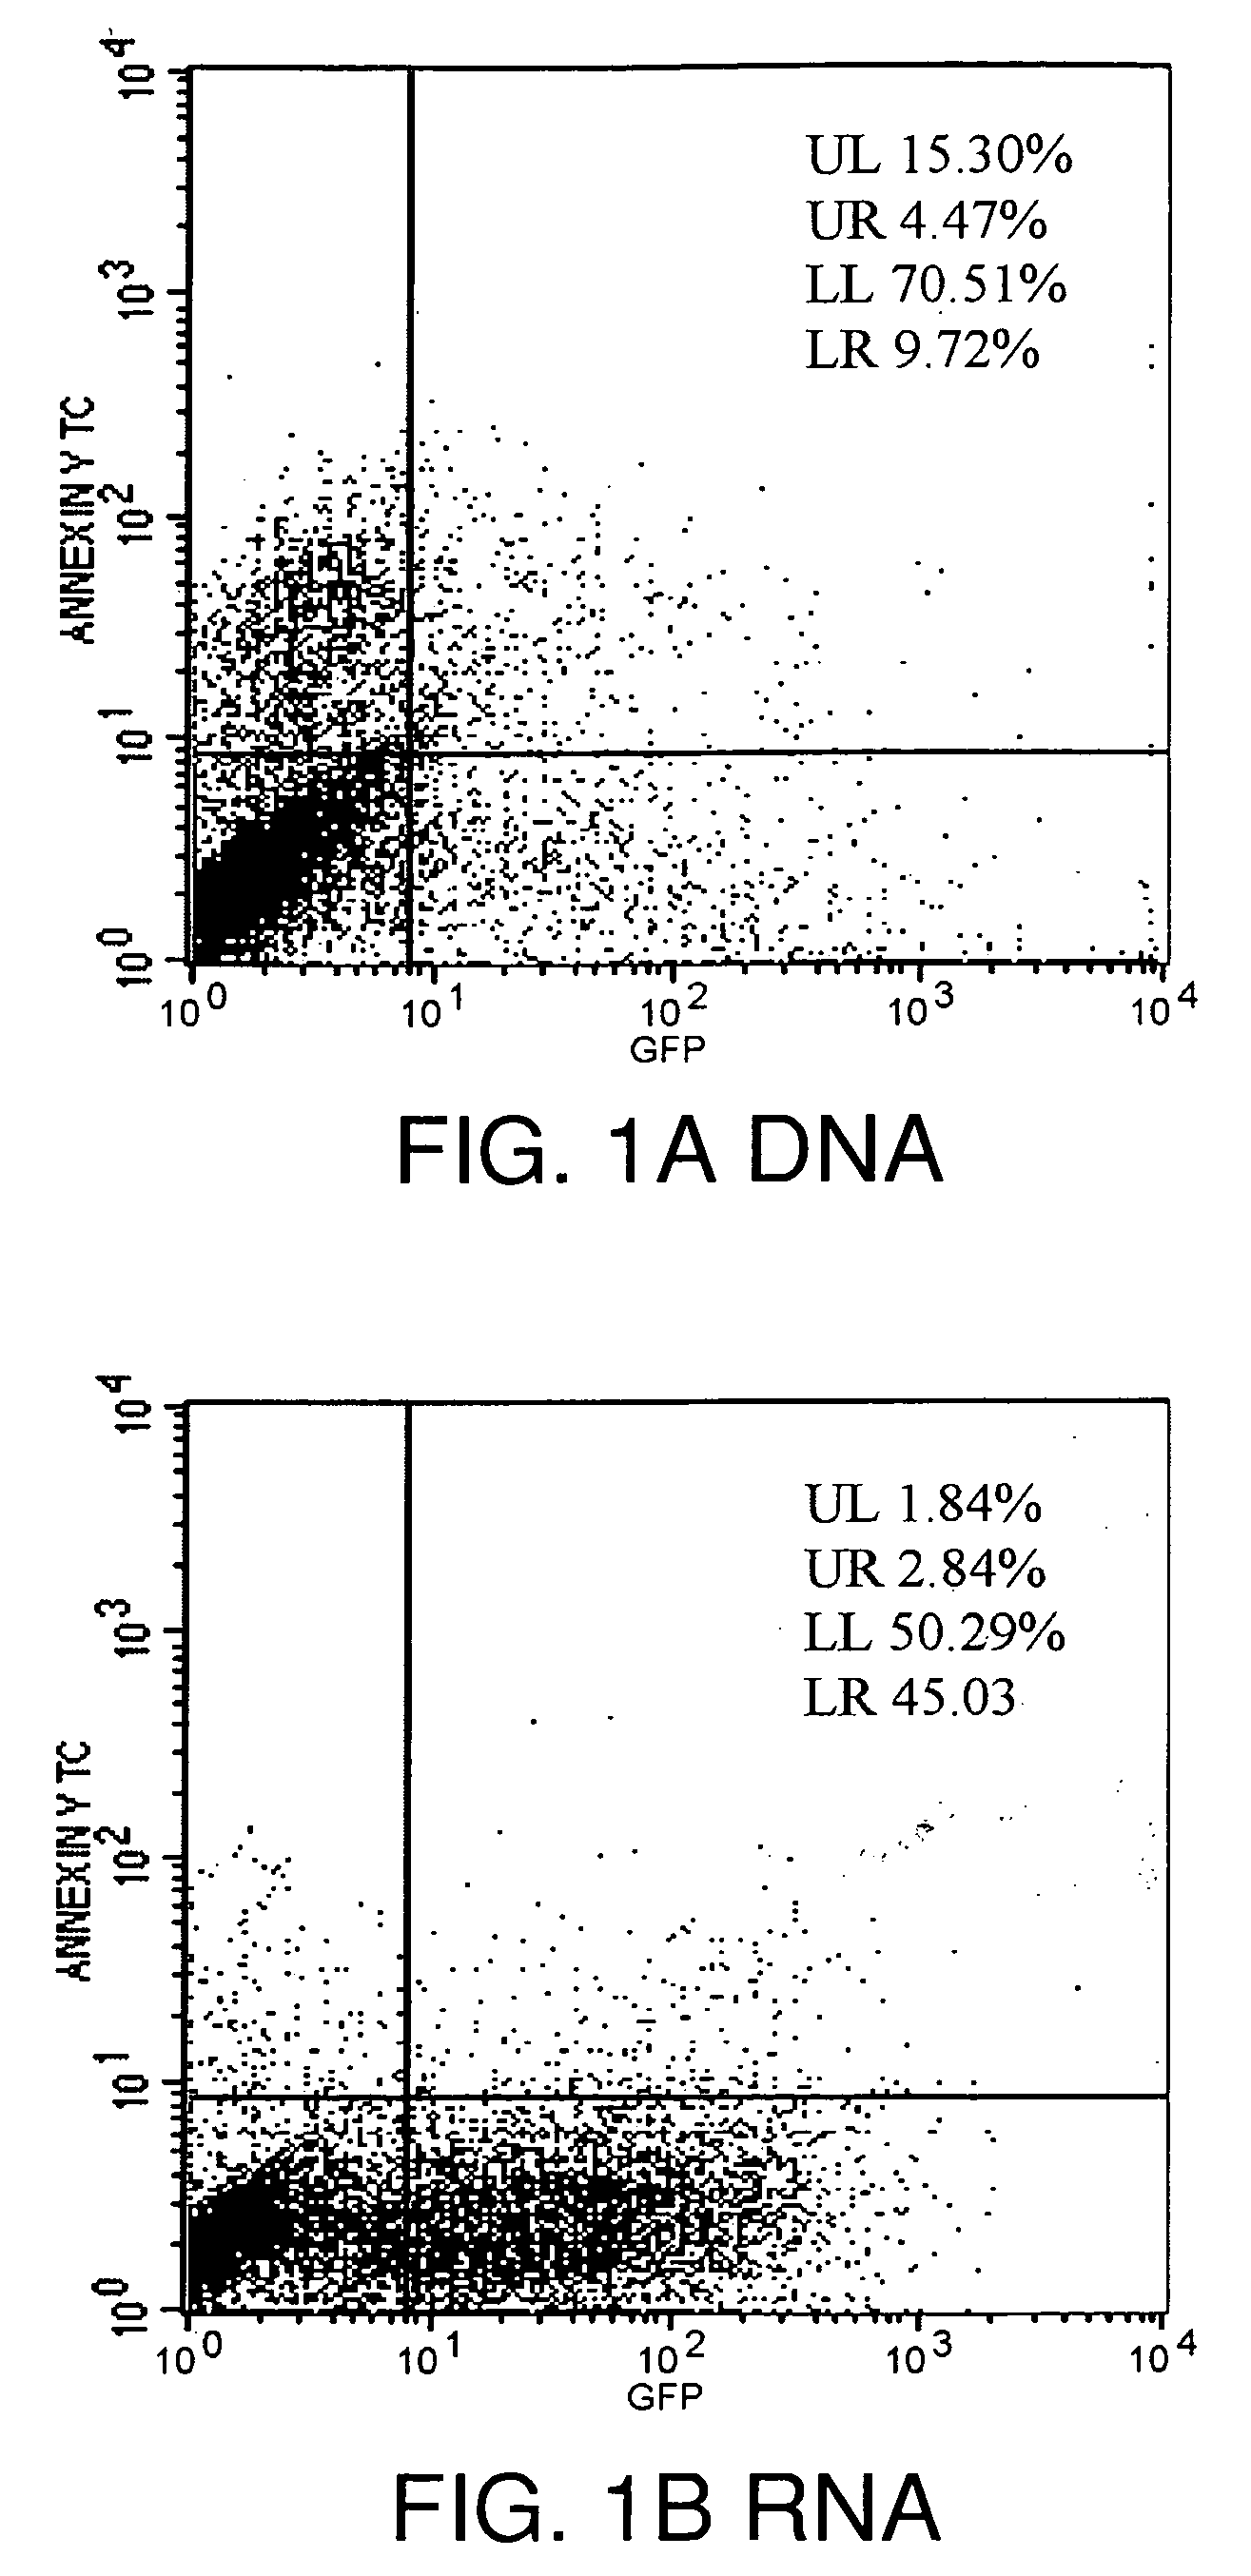 Methods and models for rapid, widespread delivery of genetic material to the CNS using non-viral, cationic lipid-mediated vectors